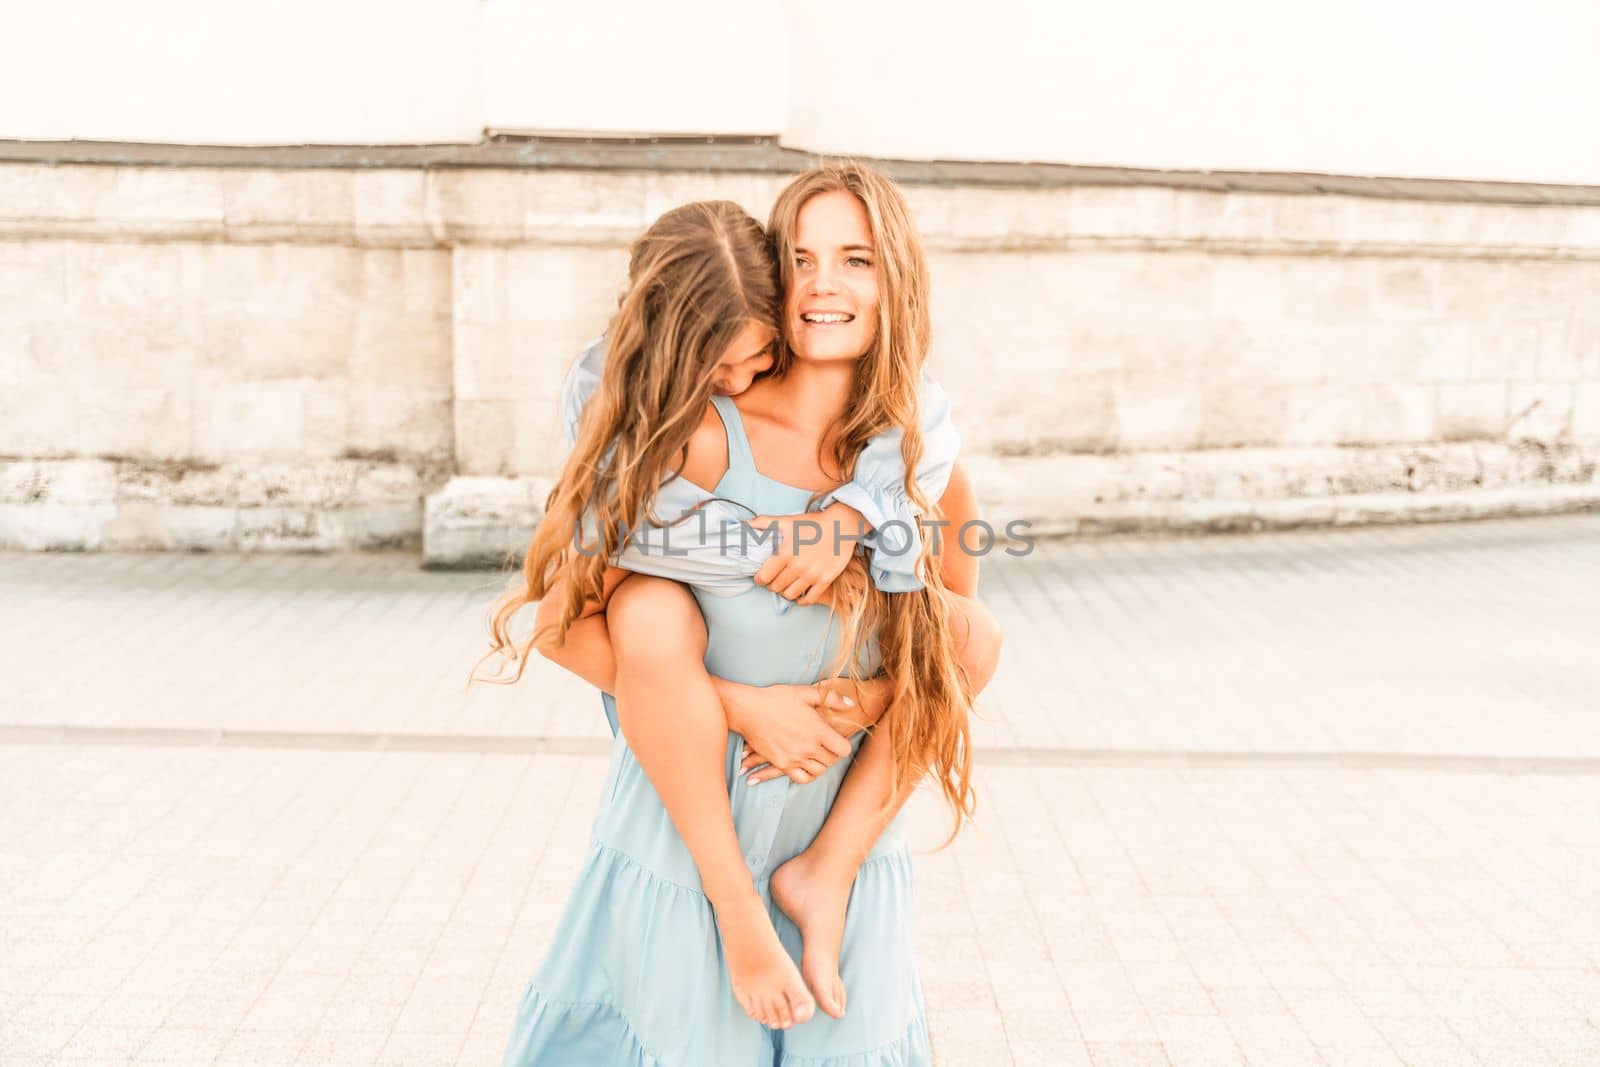 Mother of the daughter walks playing. Mother holds the girl on her back, holding her legs, and her daughter hugs her by the shoulders. Dressed in blue dresses